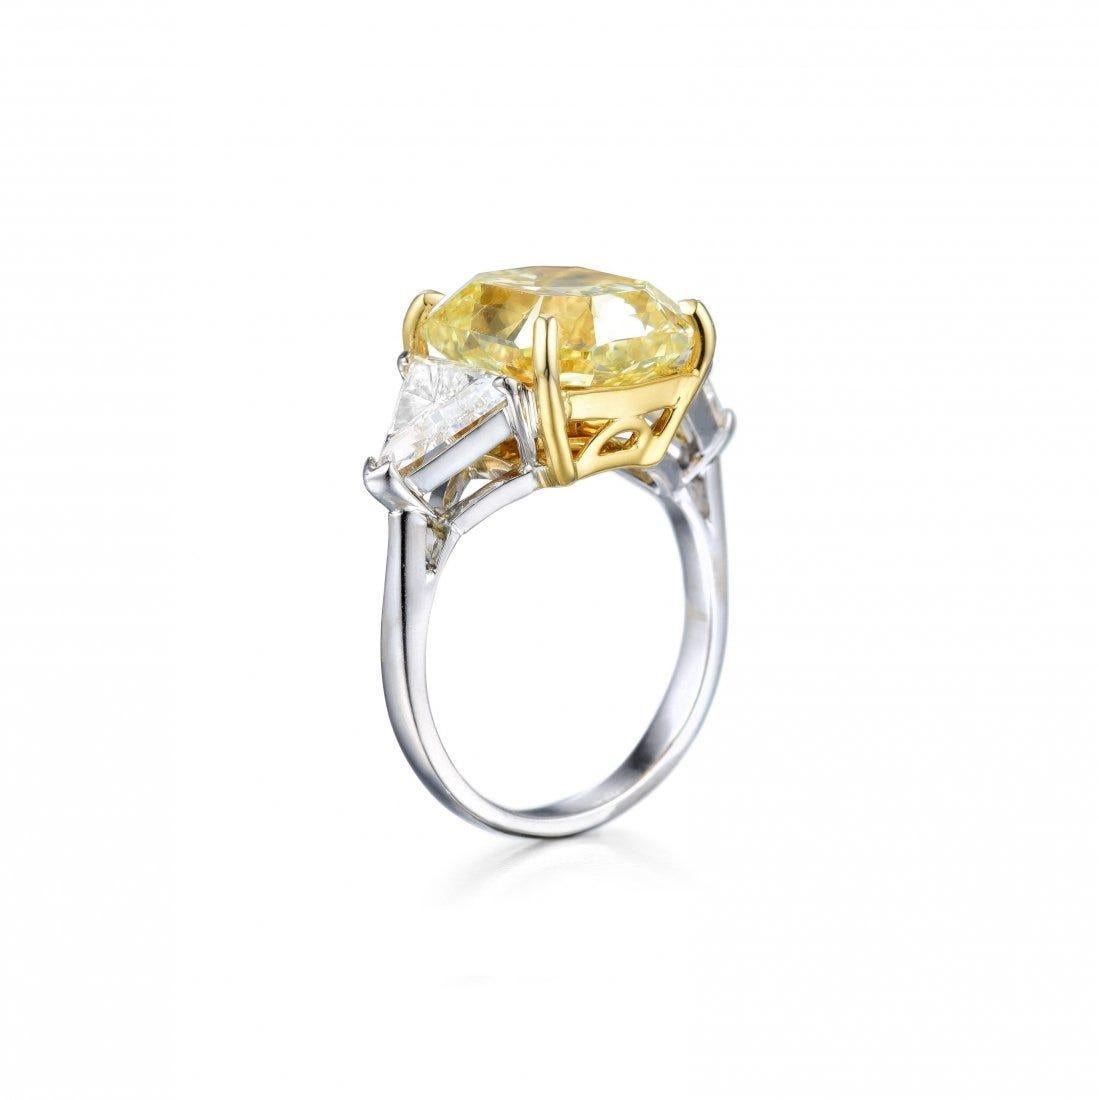 GIA Certified 4 carat Fancy Yellow Cushion Diamond Ring, adorned with exquisite trillion side diamonds, all delicately set in a combination of platinum and 18k yellow gold. This ring is a testament to unparalleled craftsmanship and luxury. The